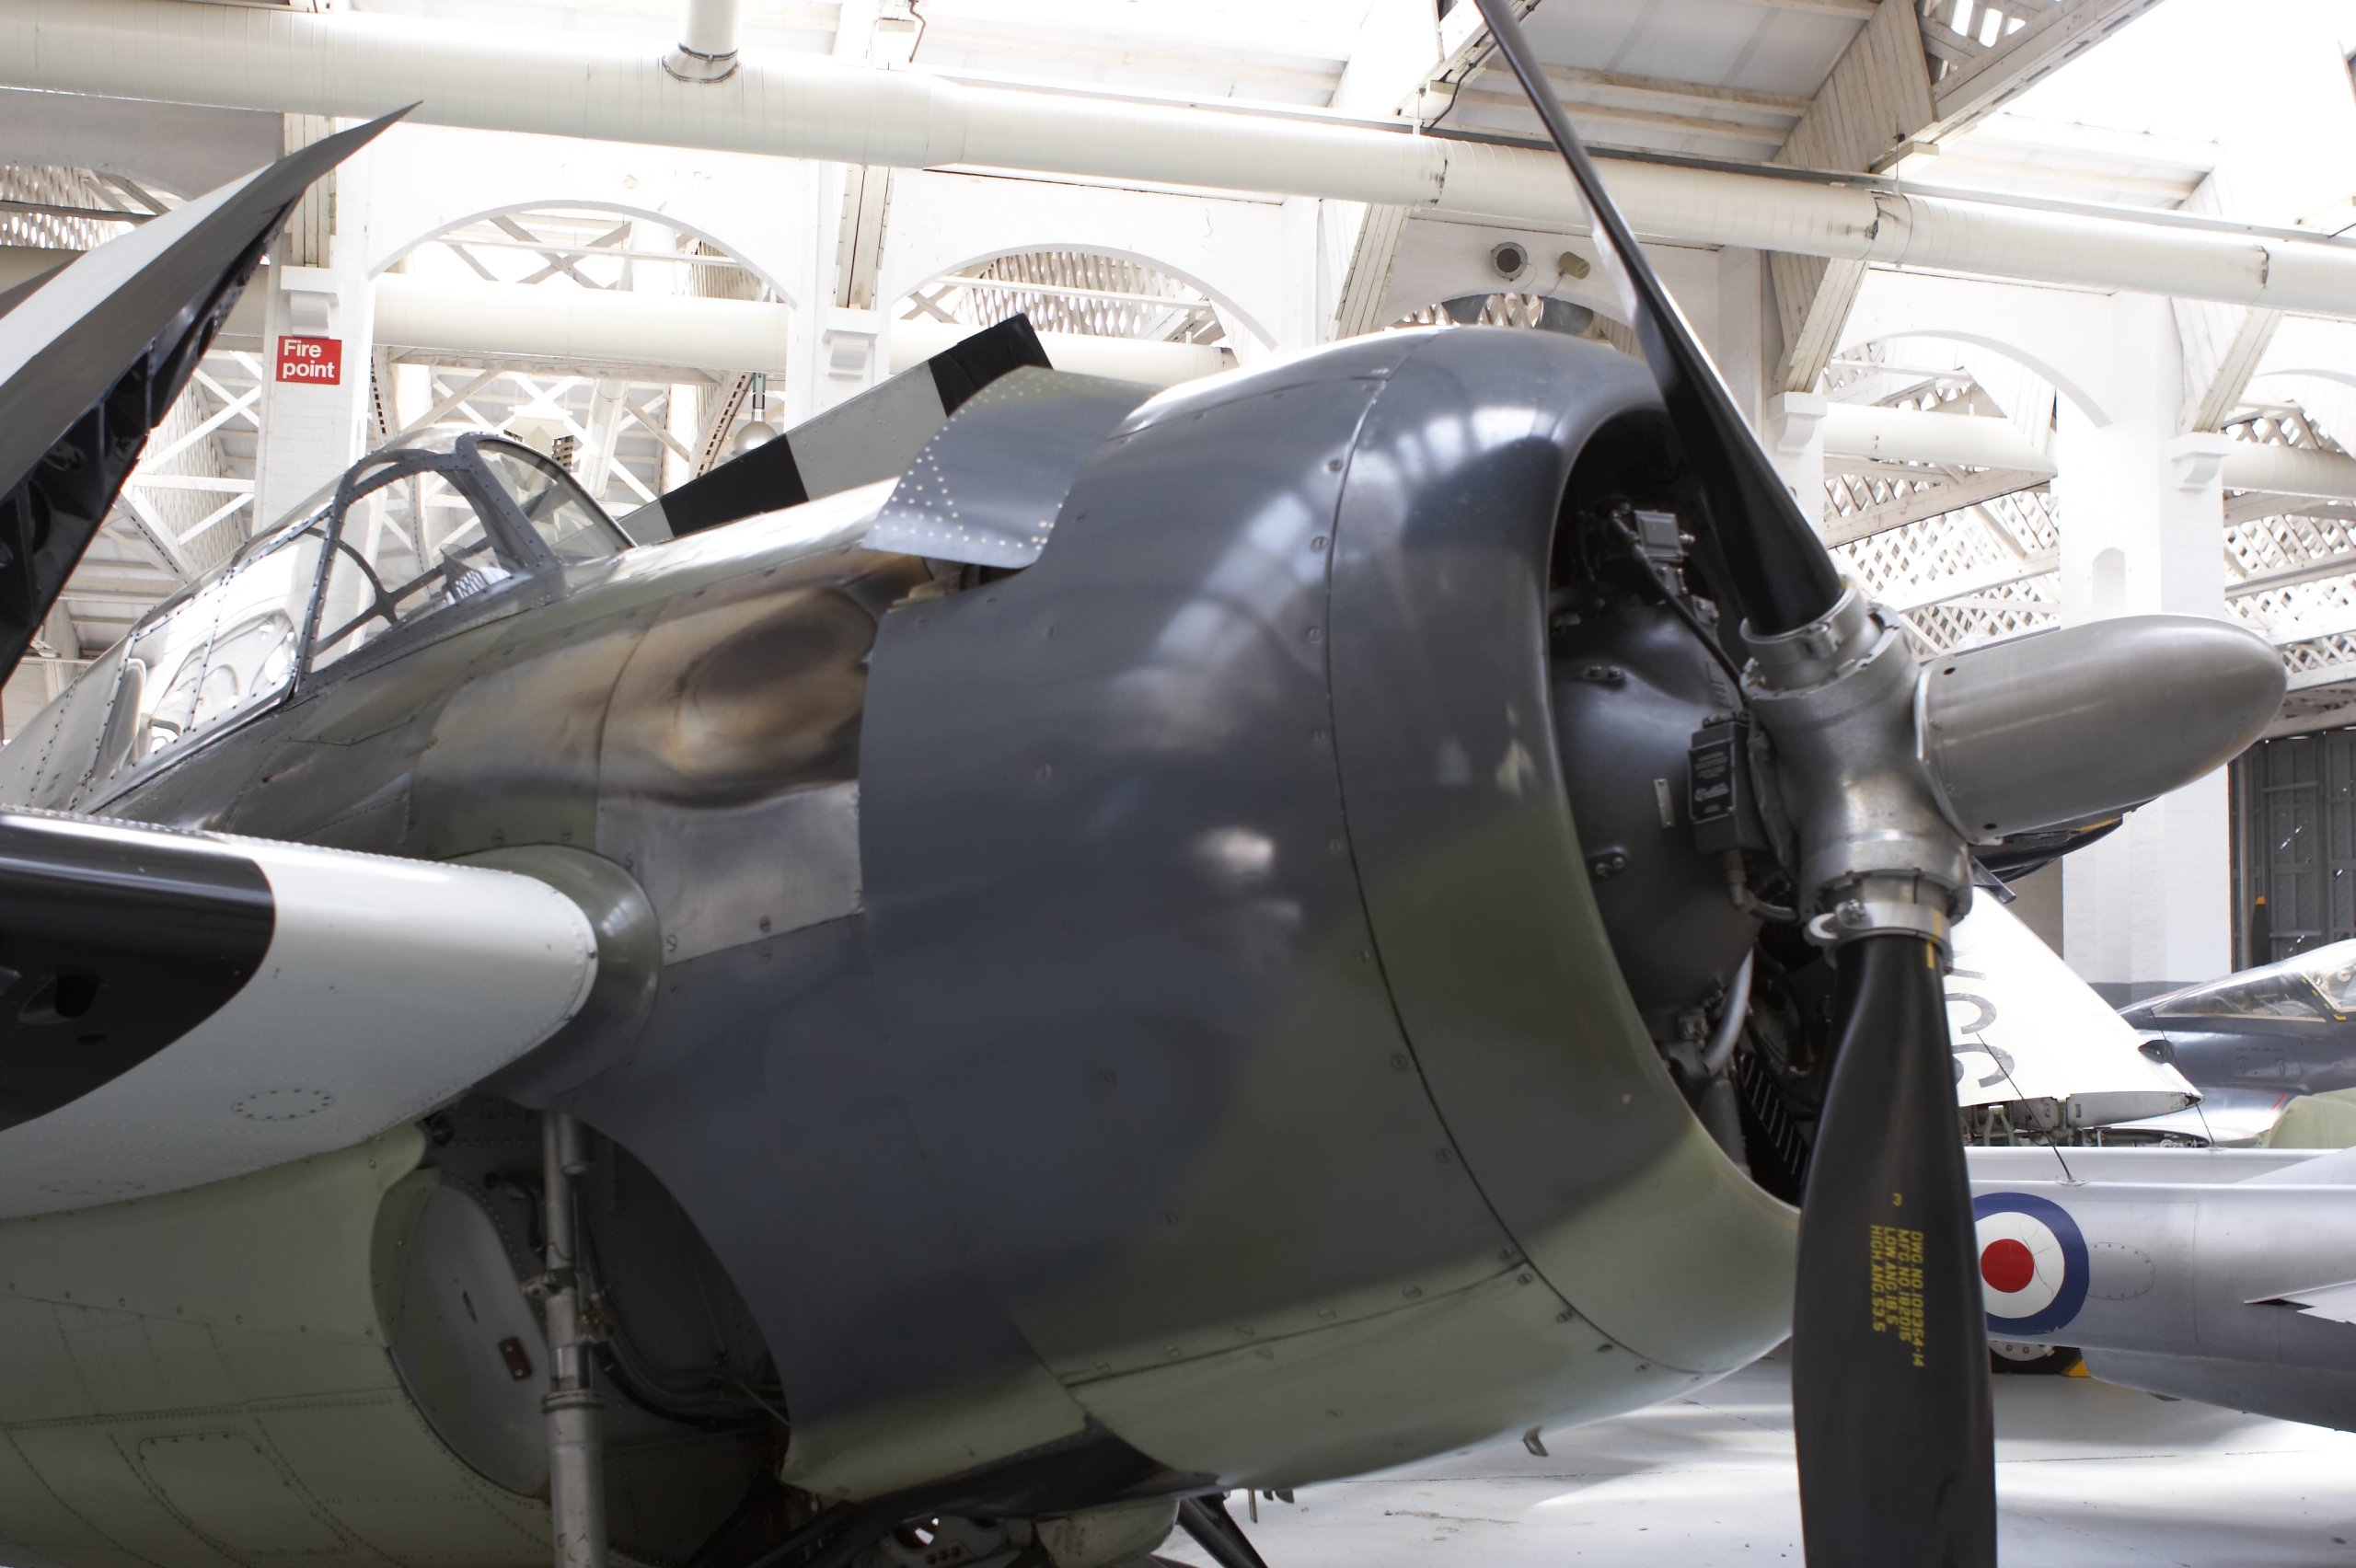 Close up view of an american fighter plane from world war 2 at the Museum of Flying